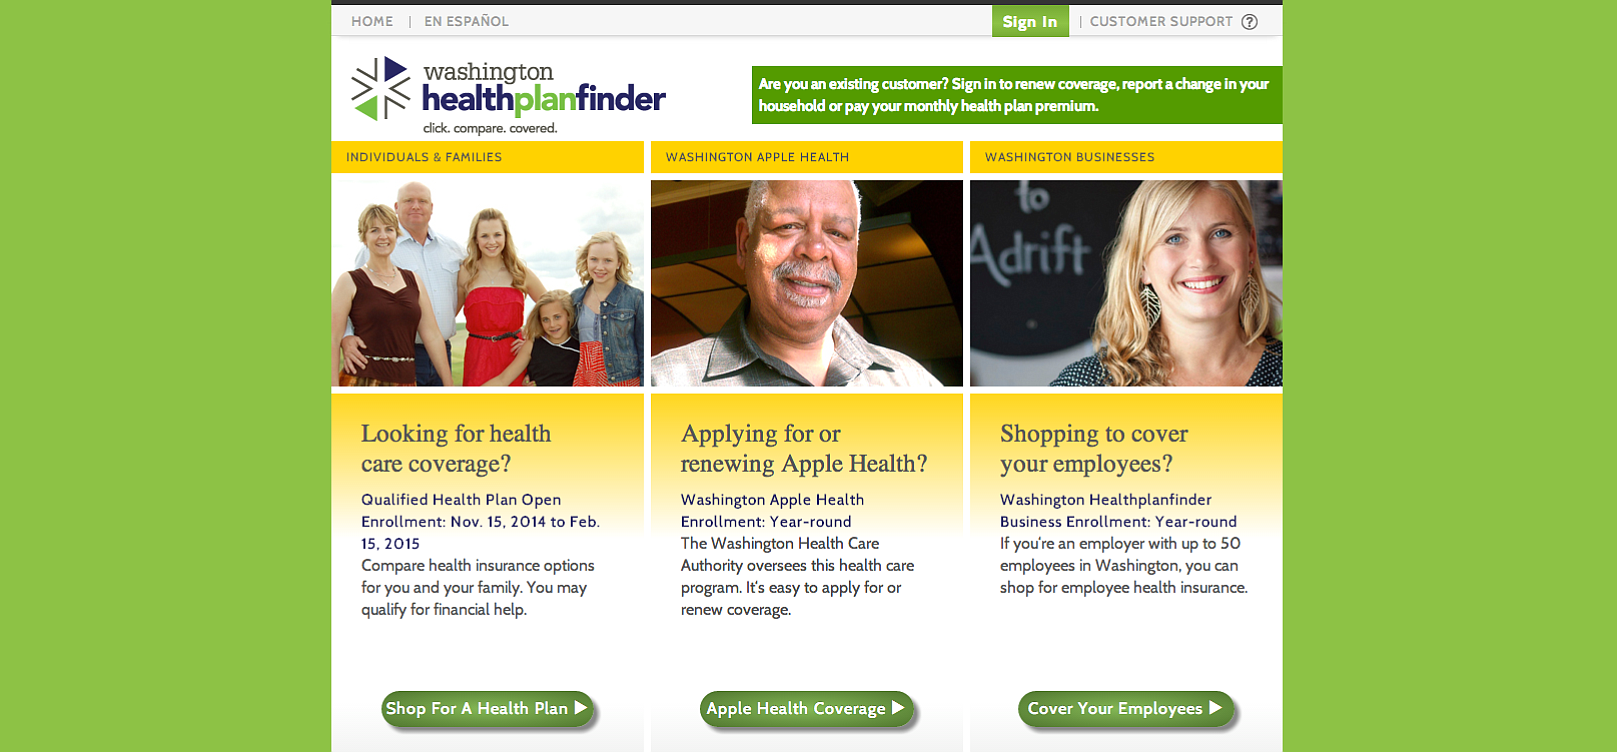 The homepage for www.wahealthplanfinder.com.